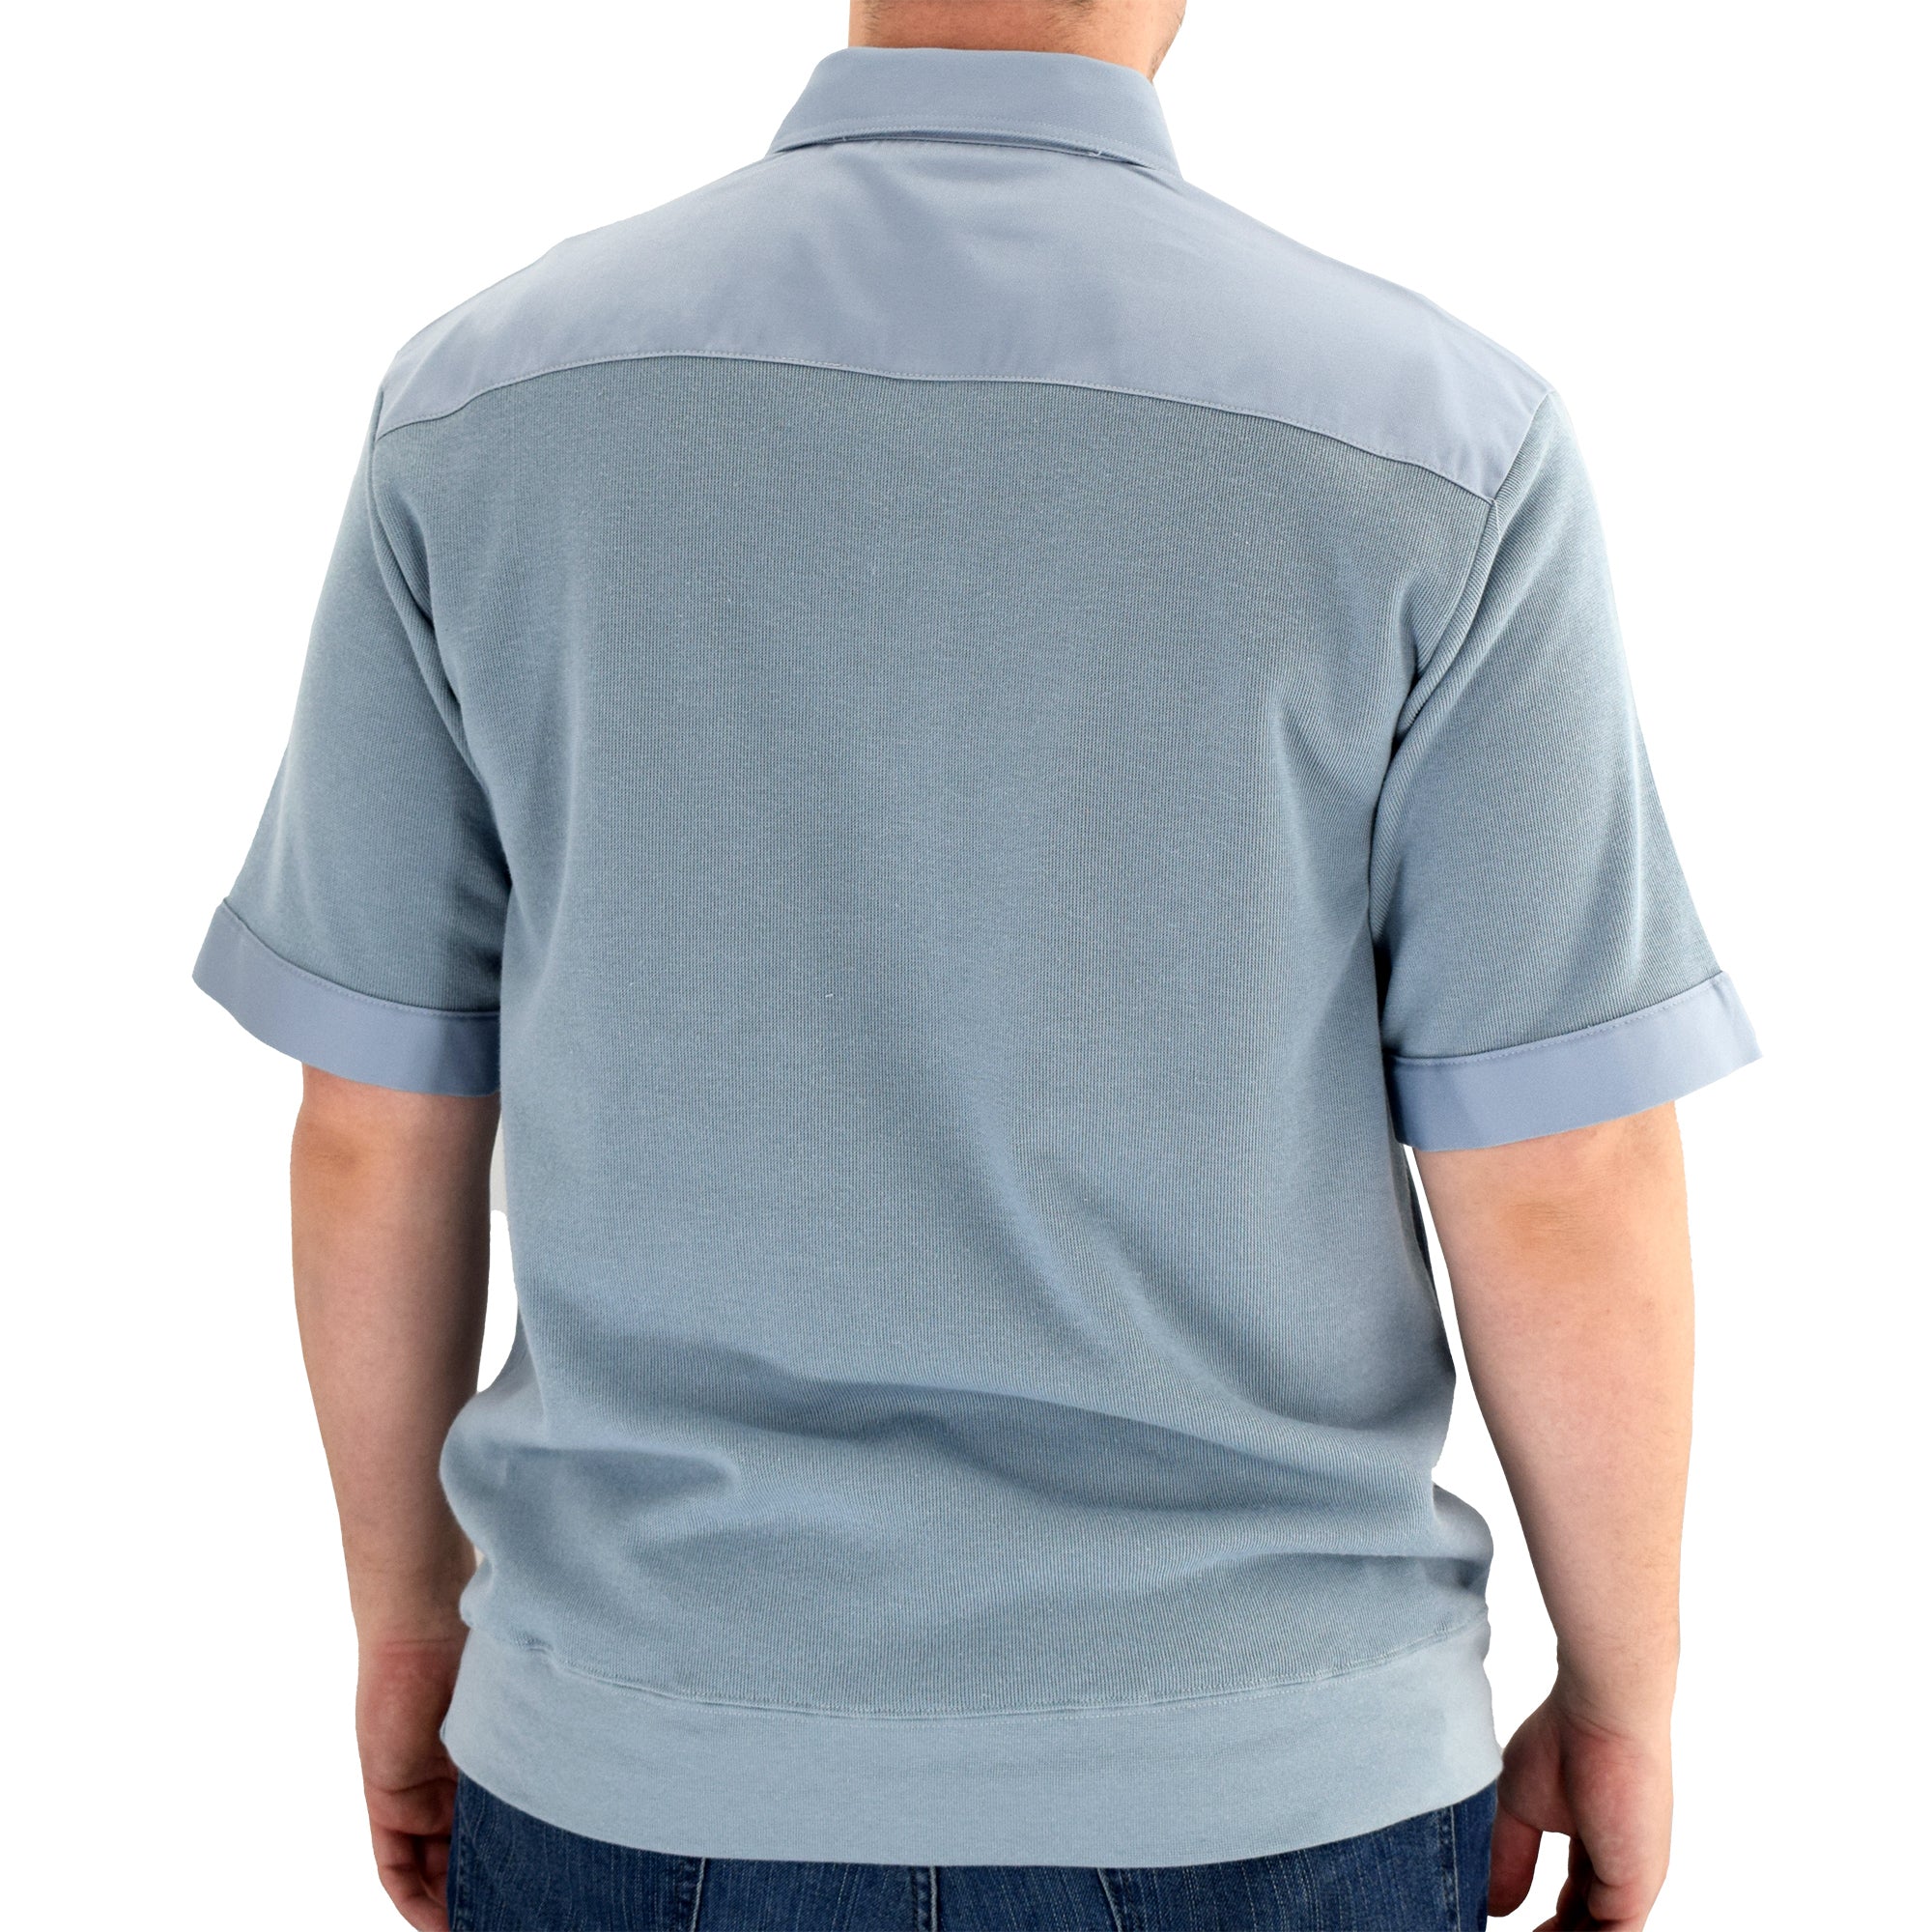 Solid Knit Banded Bottom Shirt with Woven Chest Panel 6041-22N Big and Tall - Chambray - theflagshirt